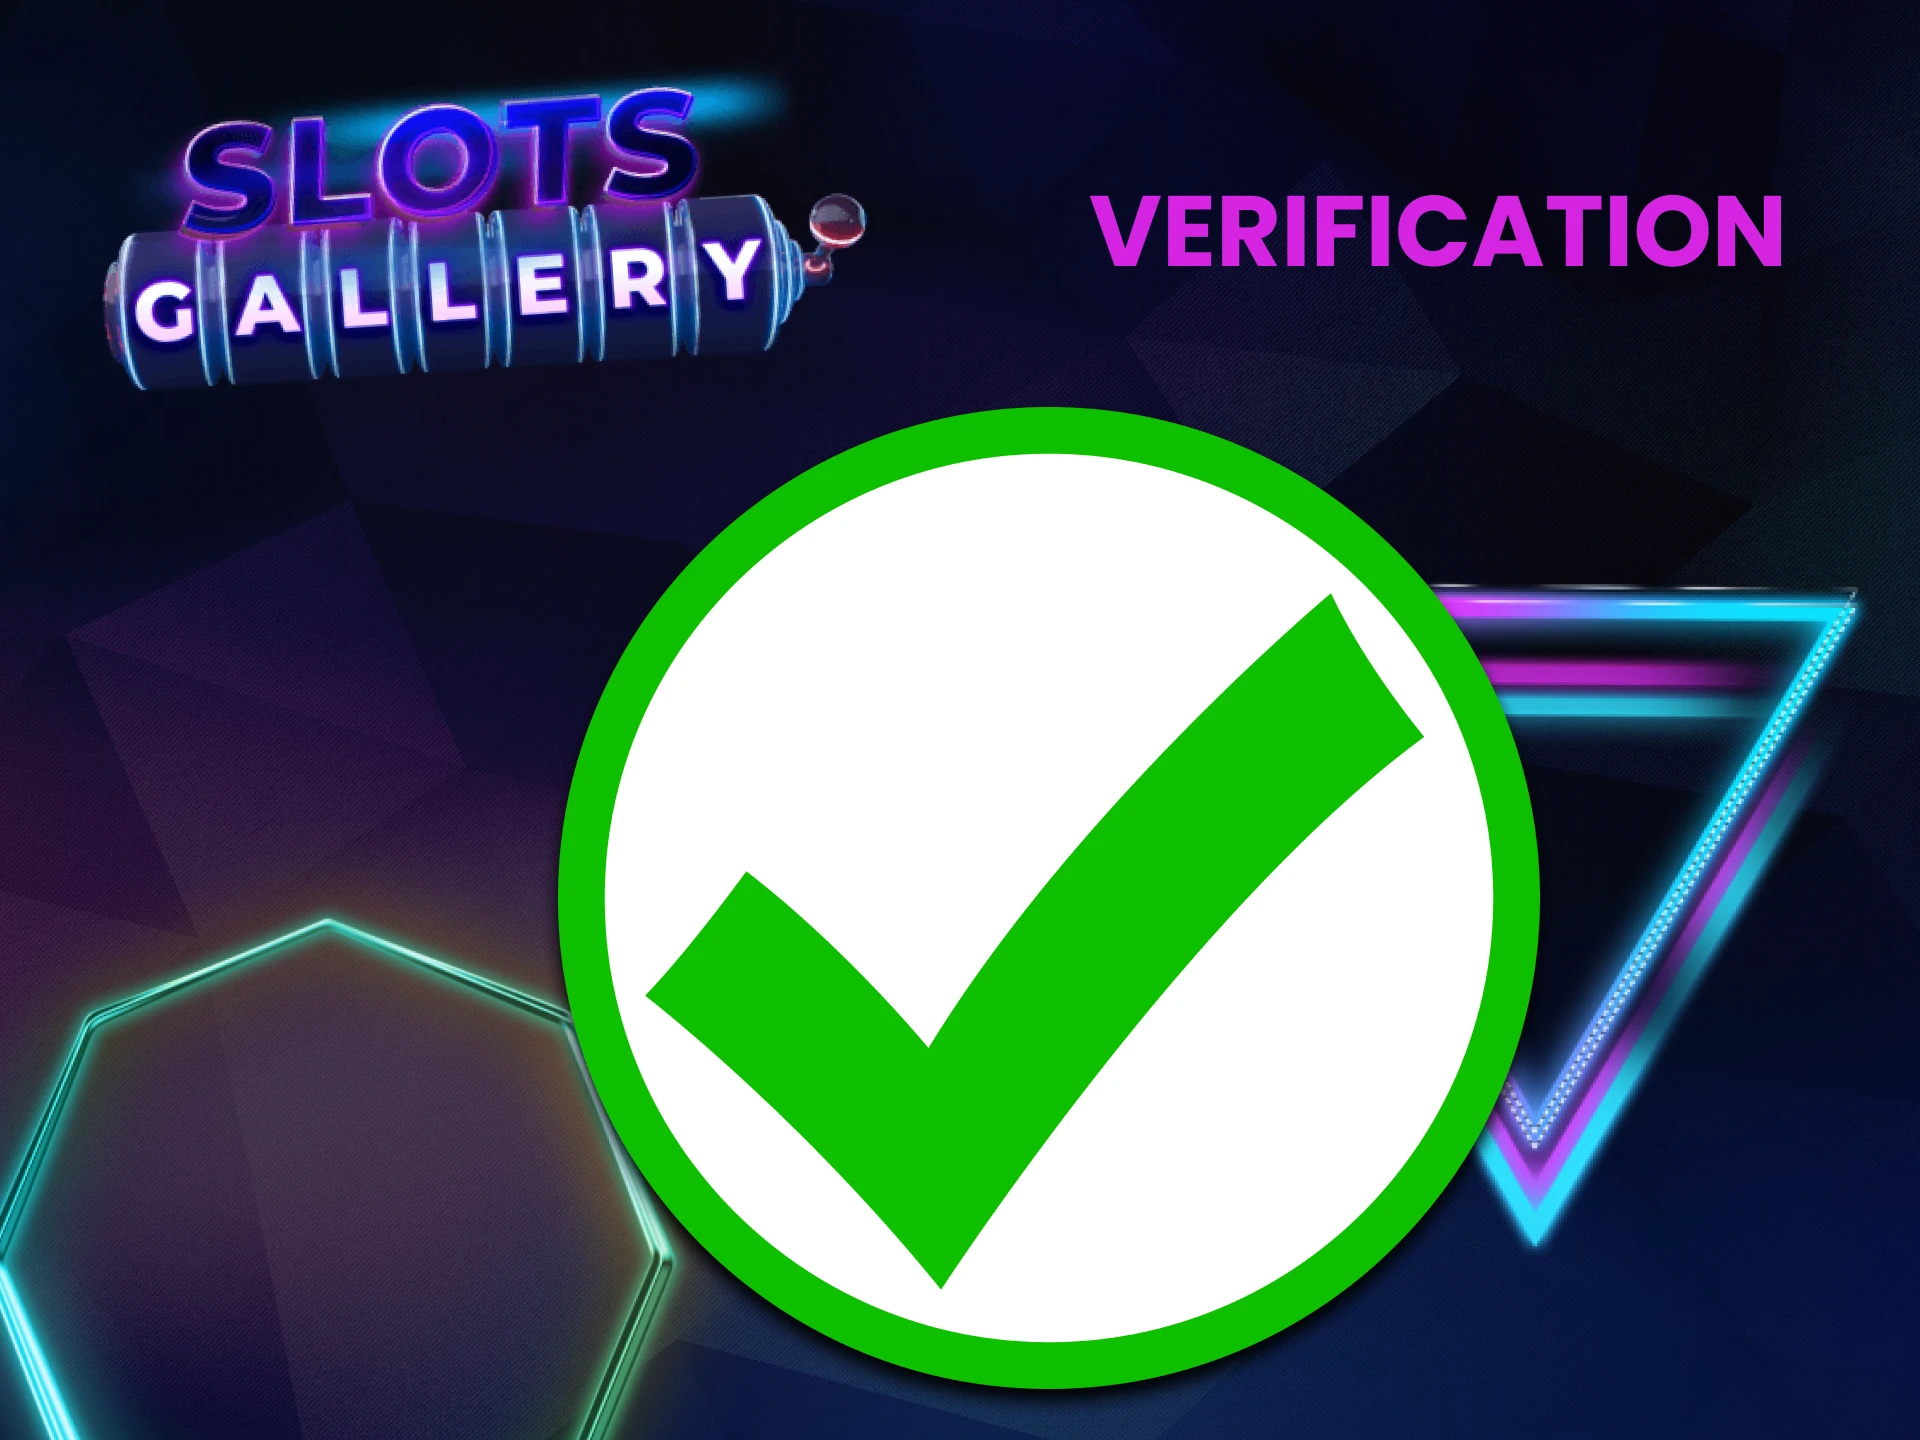 Fill in all the required information for Slots Gallery.